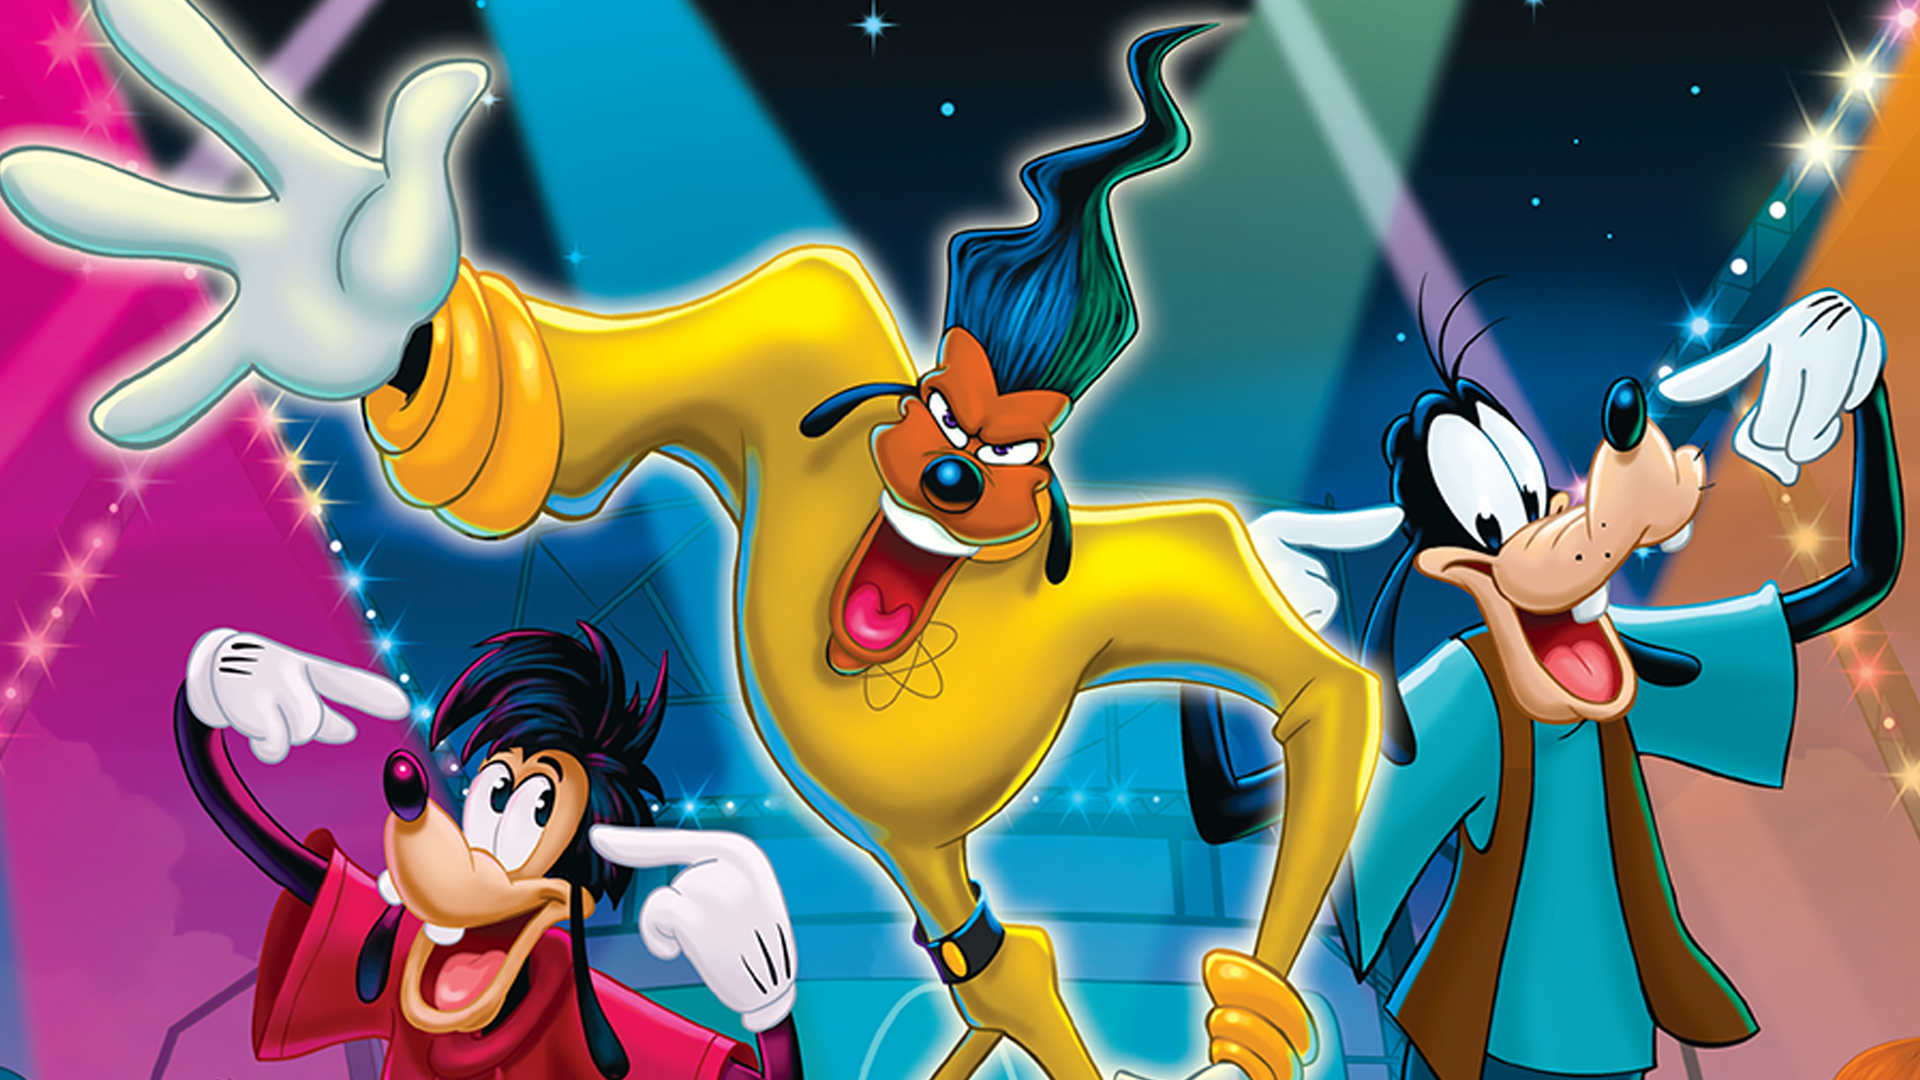 A Goofy Movie gets a board game almost 30 years after its release |  Dicebreaker